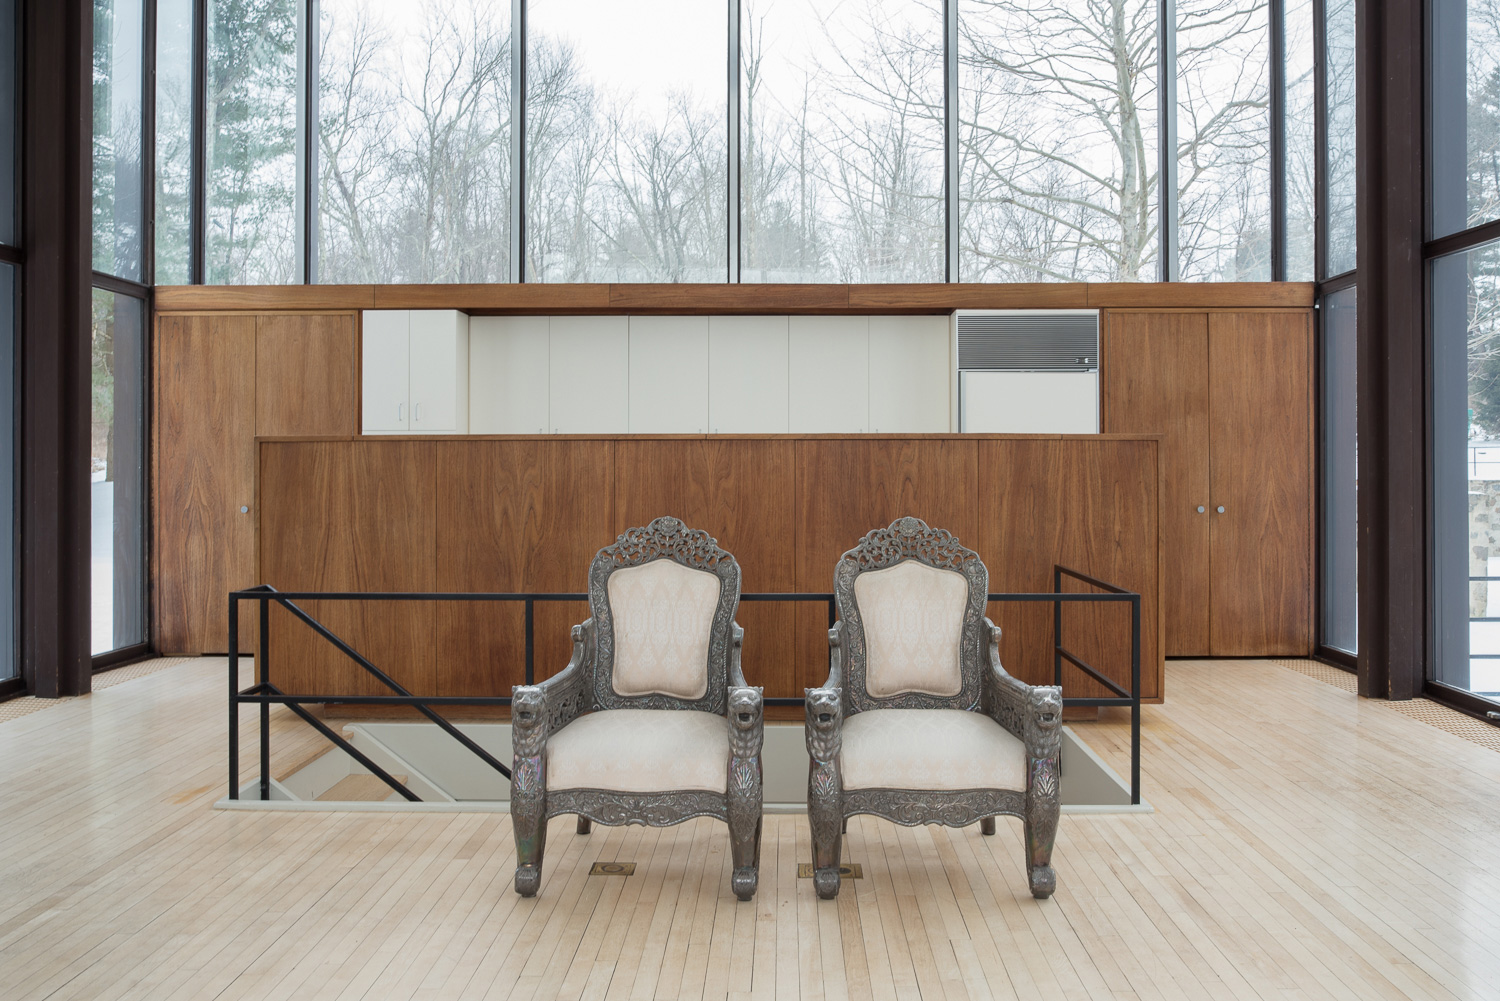 Tour Philip Johnson’s Modernist masterpiece The Wiley House